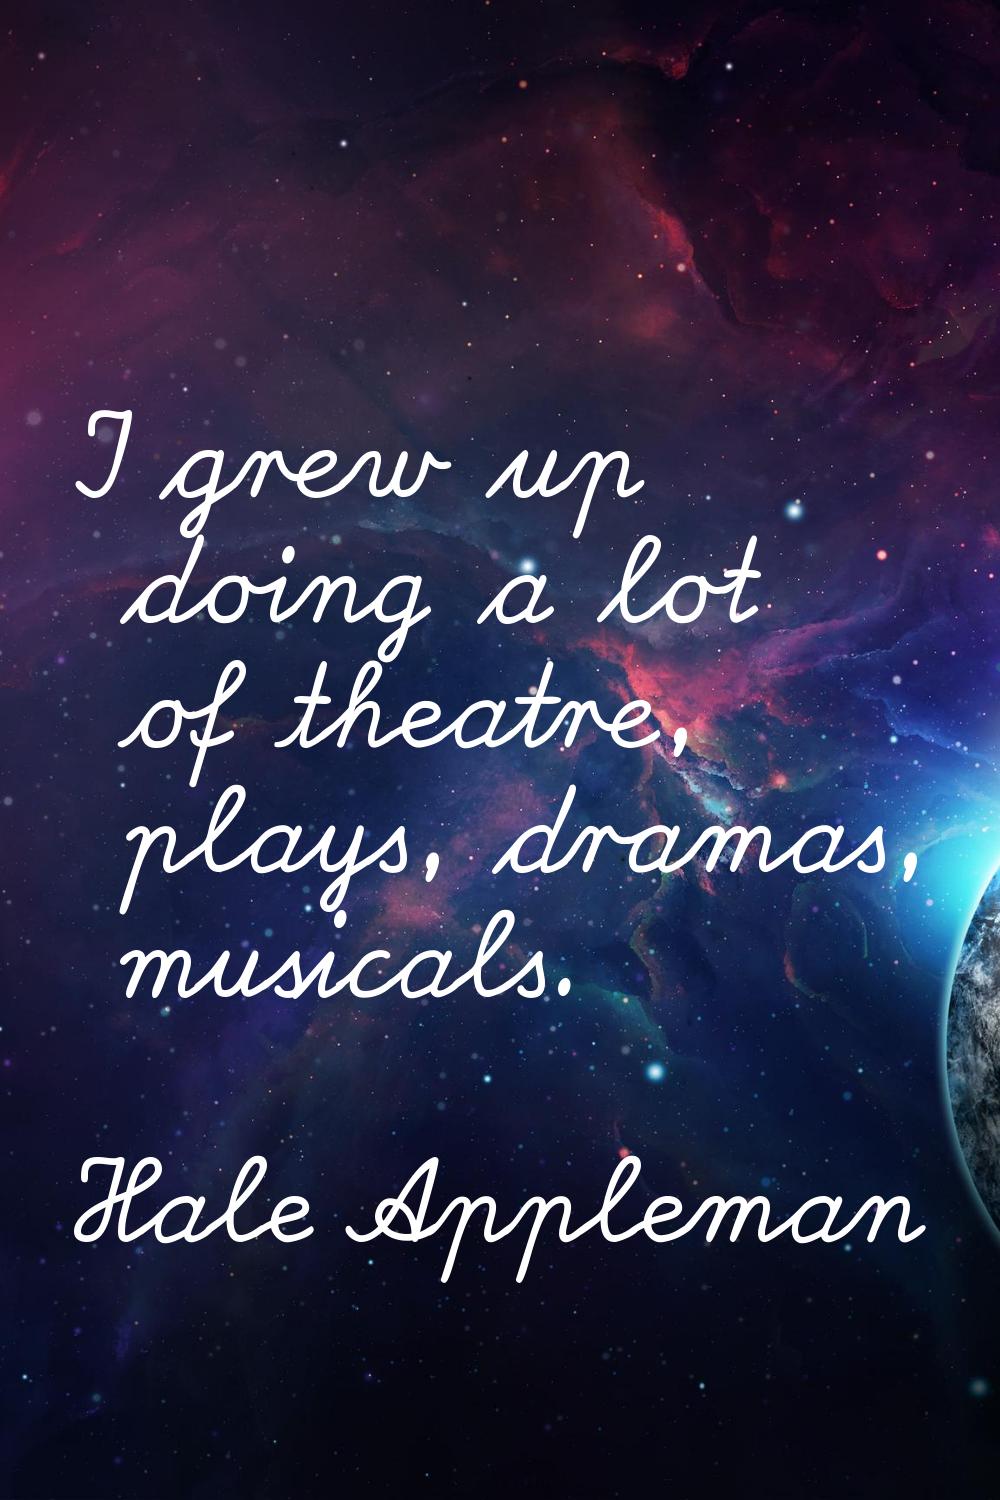 I grew up doing a lot of theatre, plays, dramas, musicals.